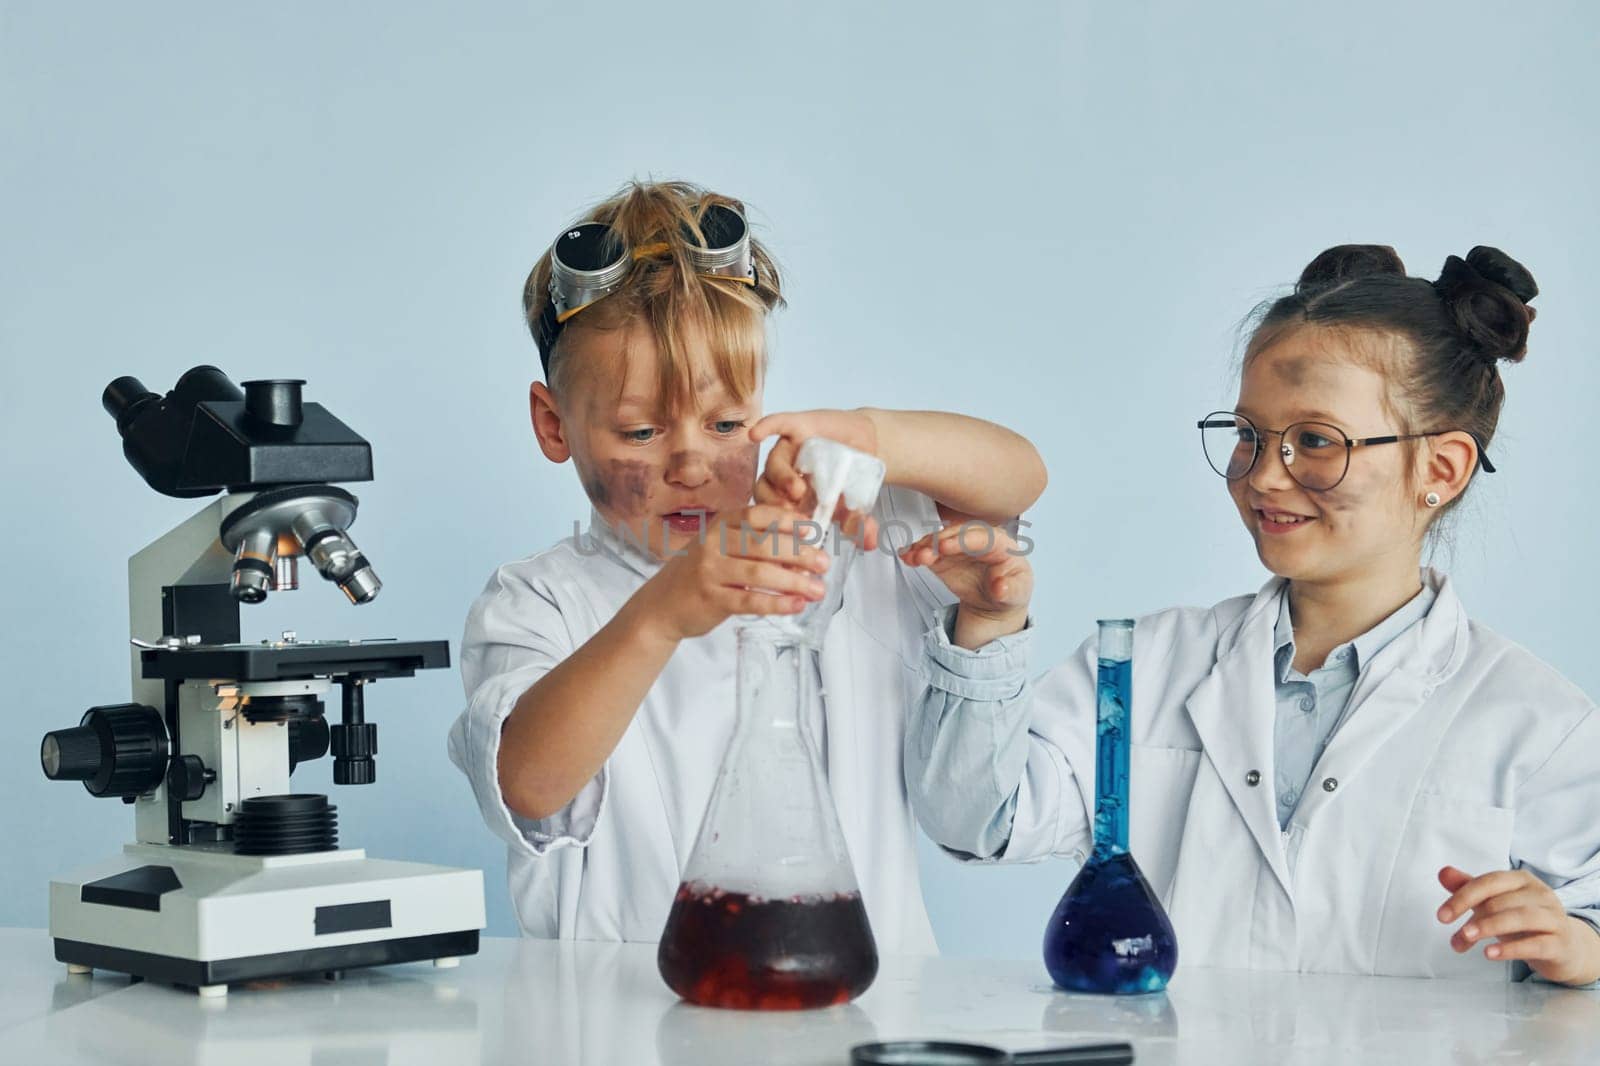 Little girl and boy in white coats plays a scientists in lab by using equipment by Standret